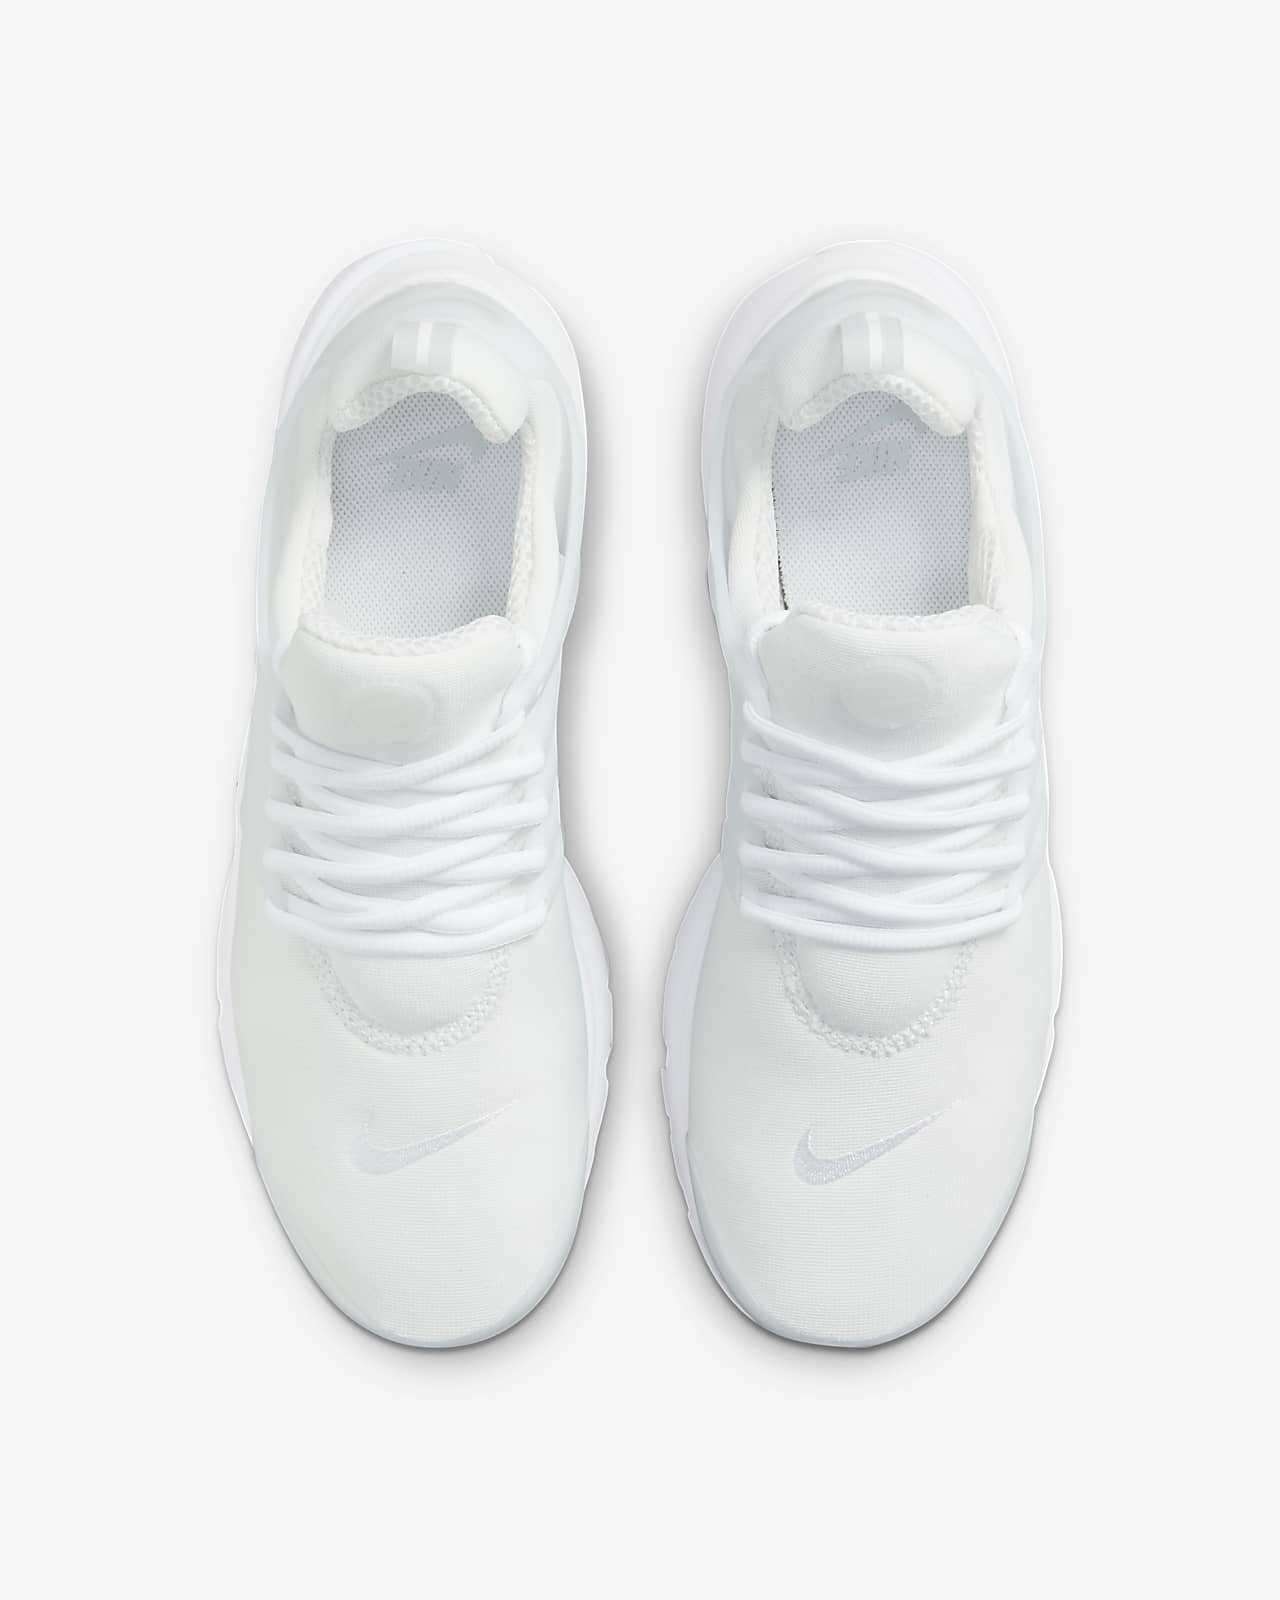 White Mens Air Max Systm Sneaker | Nike | Rack Room Shoes-baongoctrading.com.vn